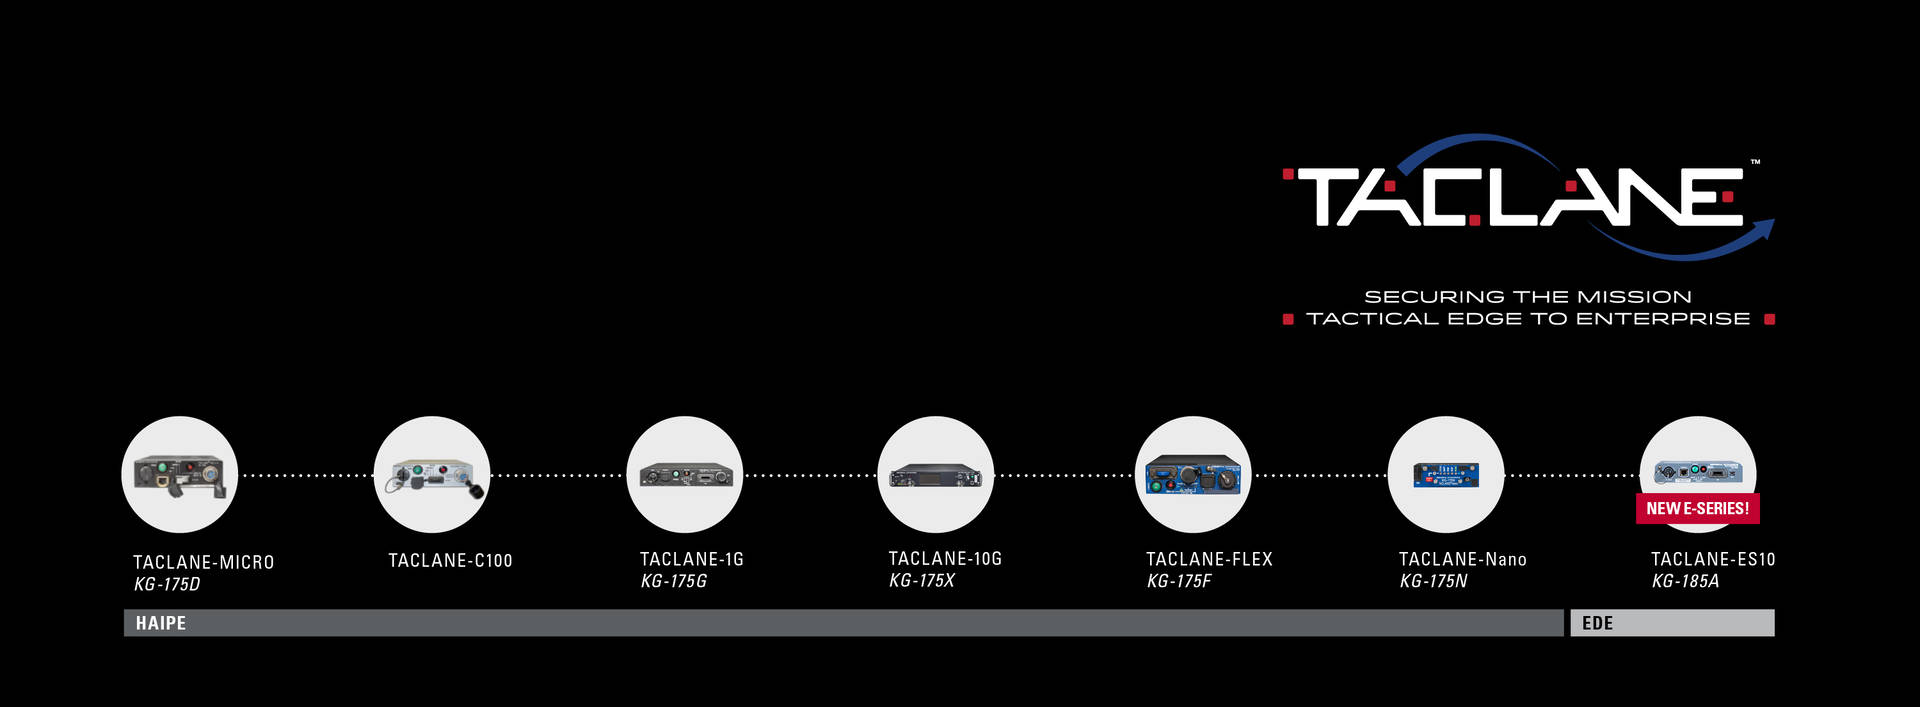 TACLANE_Features Timeline Graphic 2